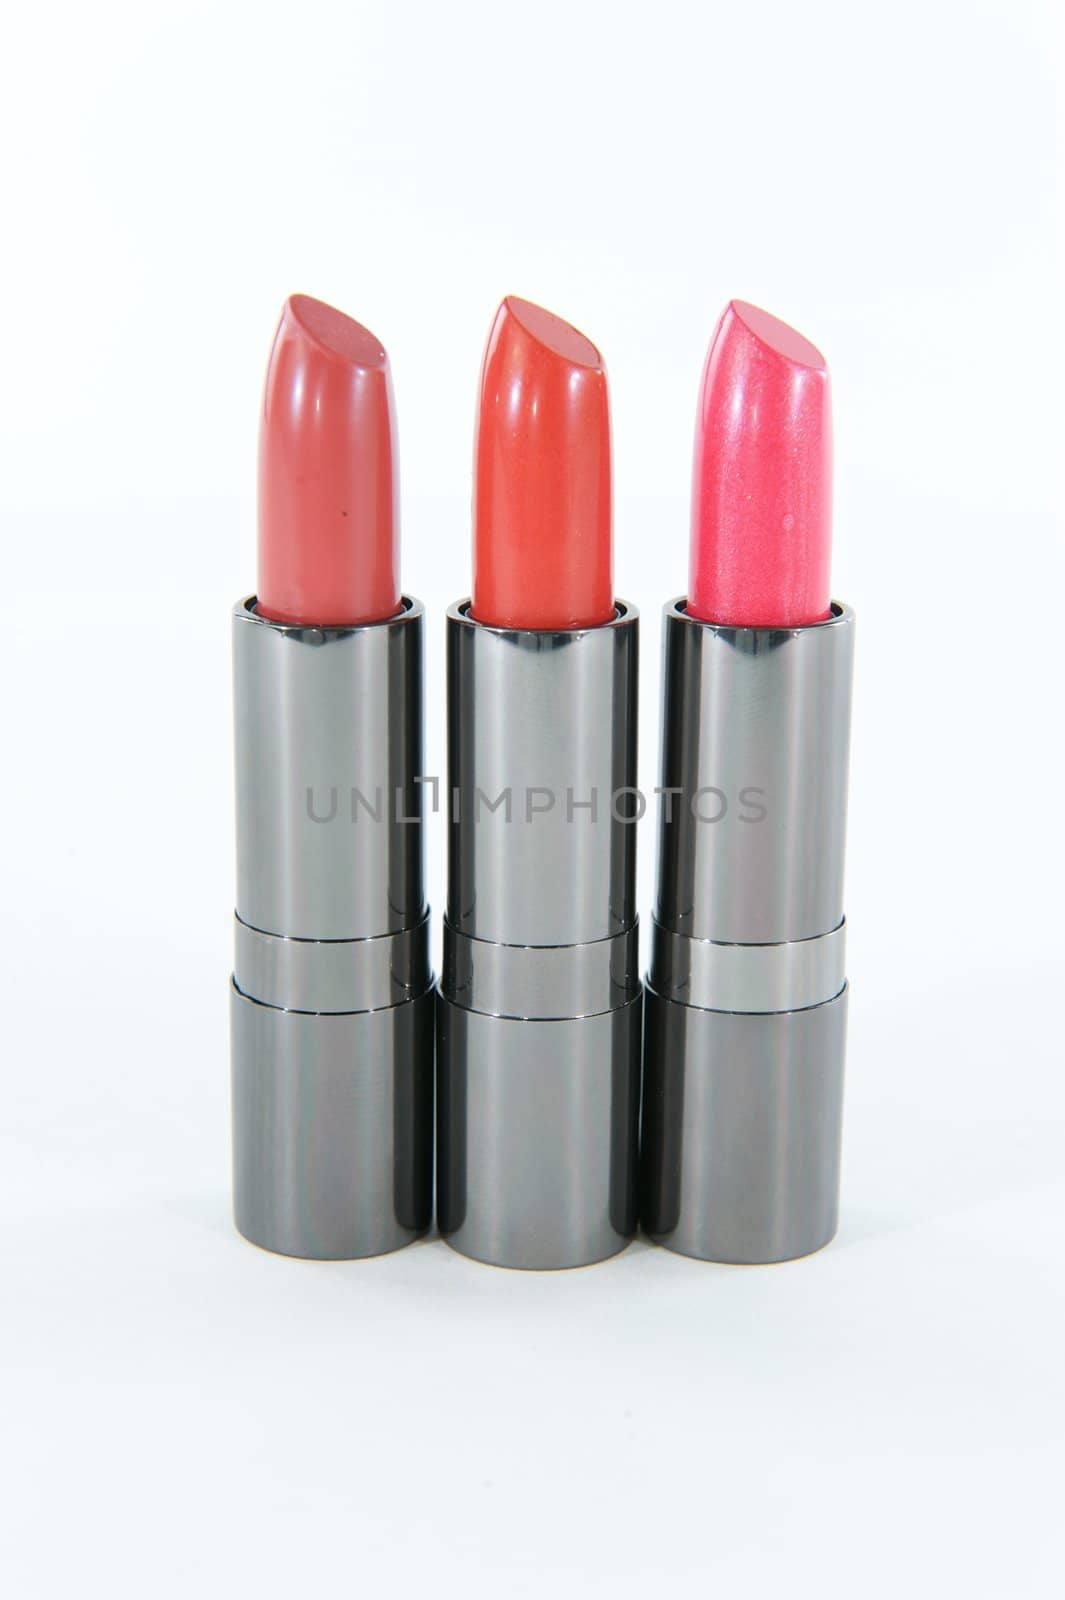 Three Lipstick Cases in a Row by pixelsnap